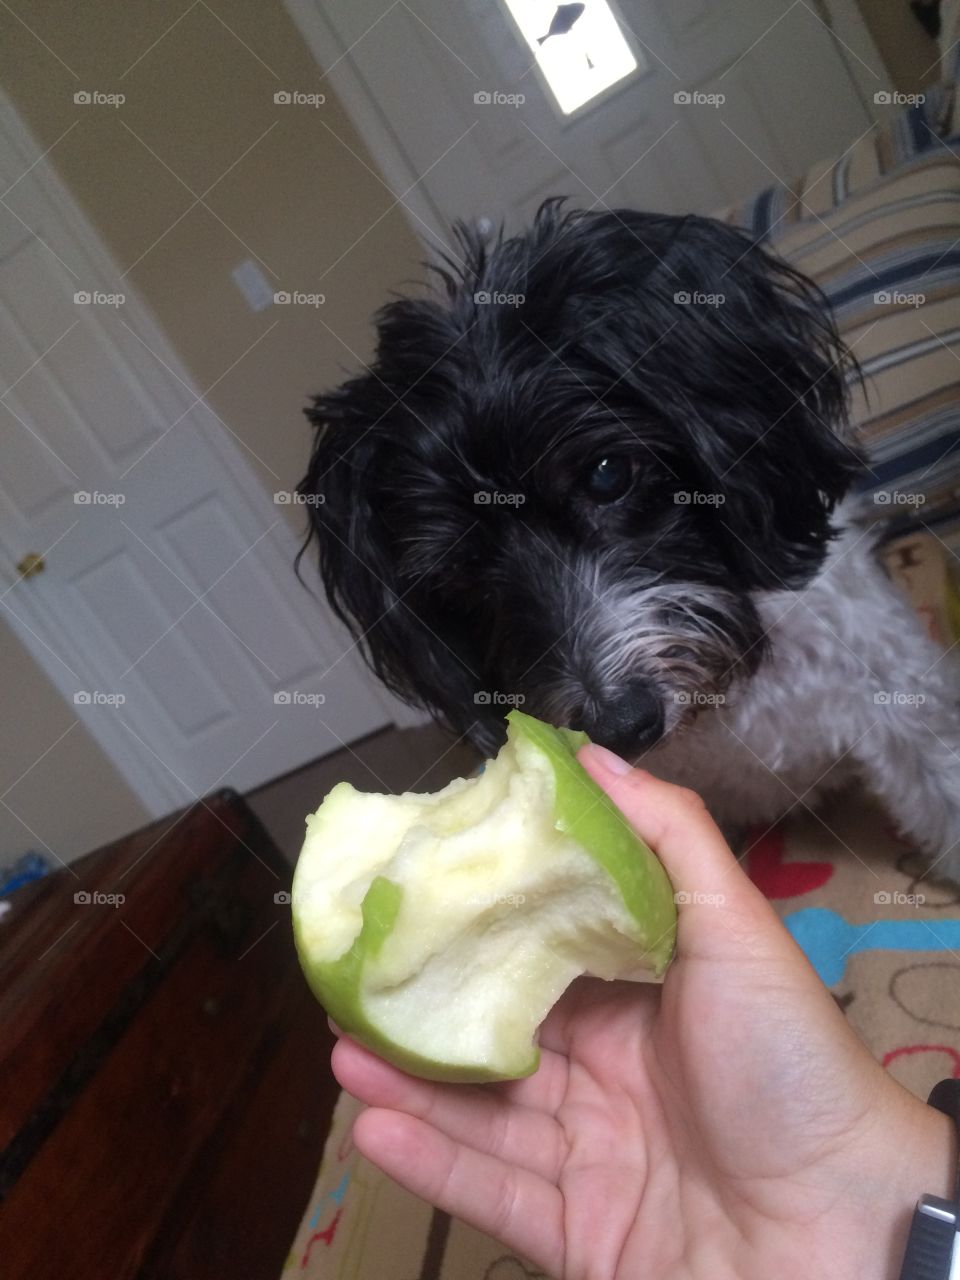 Temptation . Dog trying to eat apple 